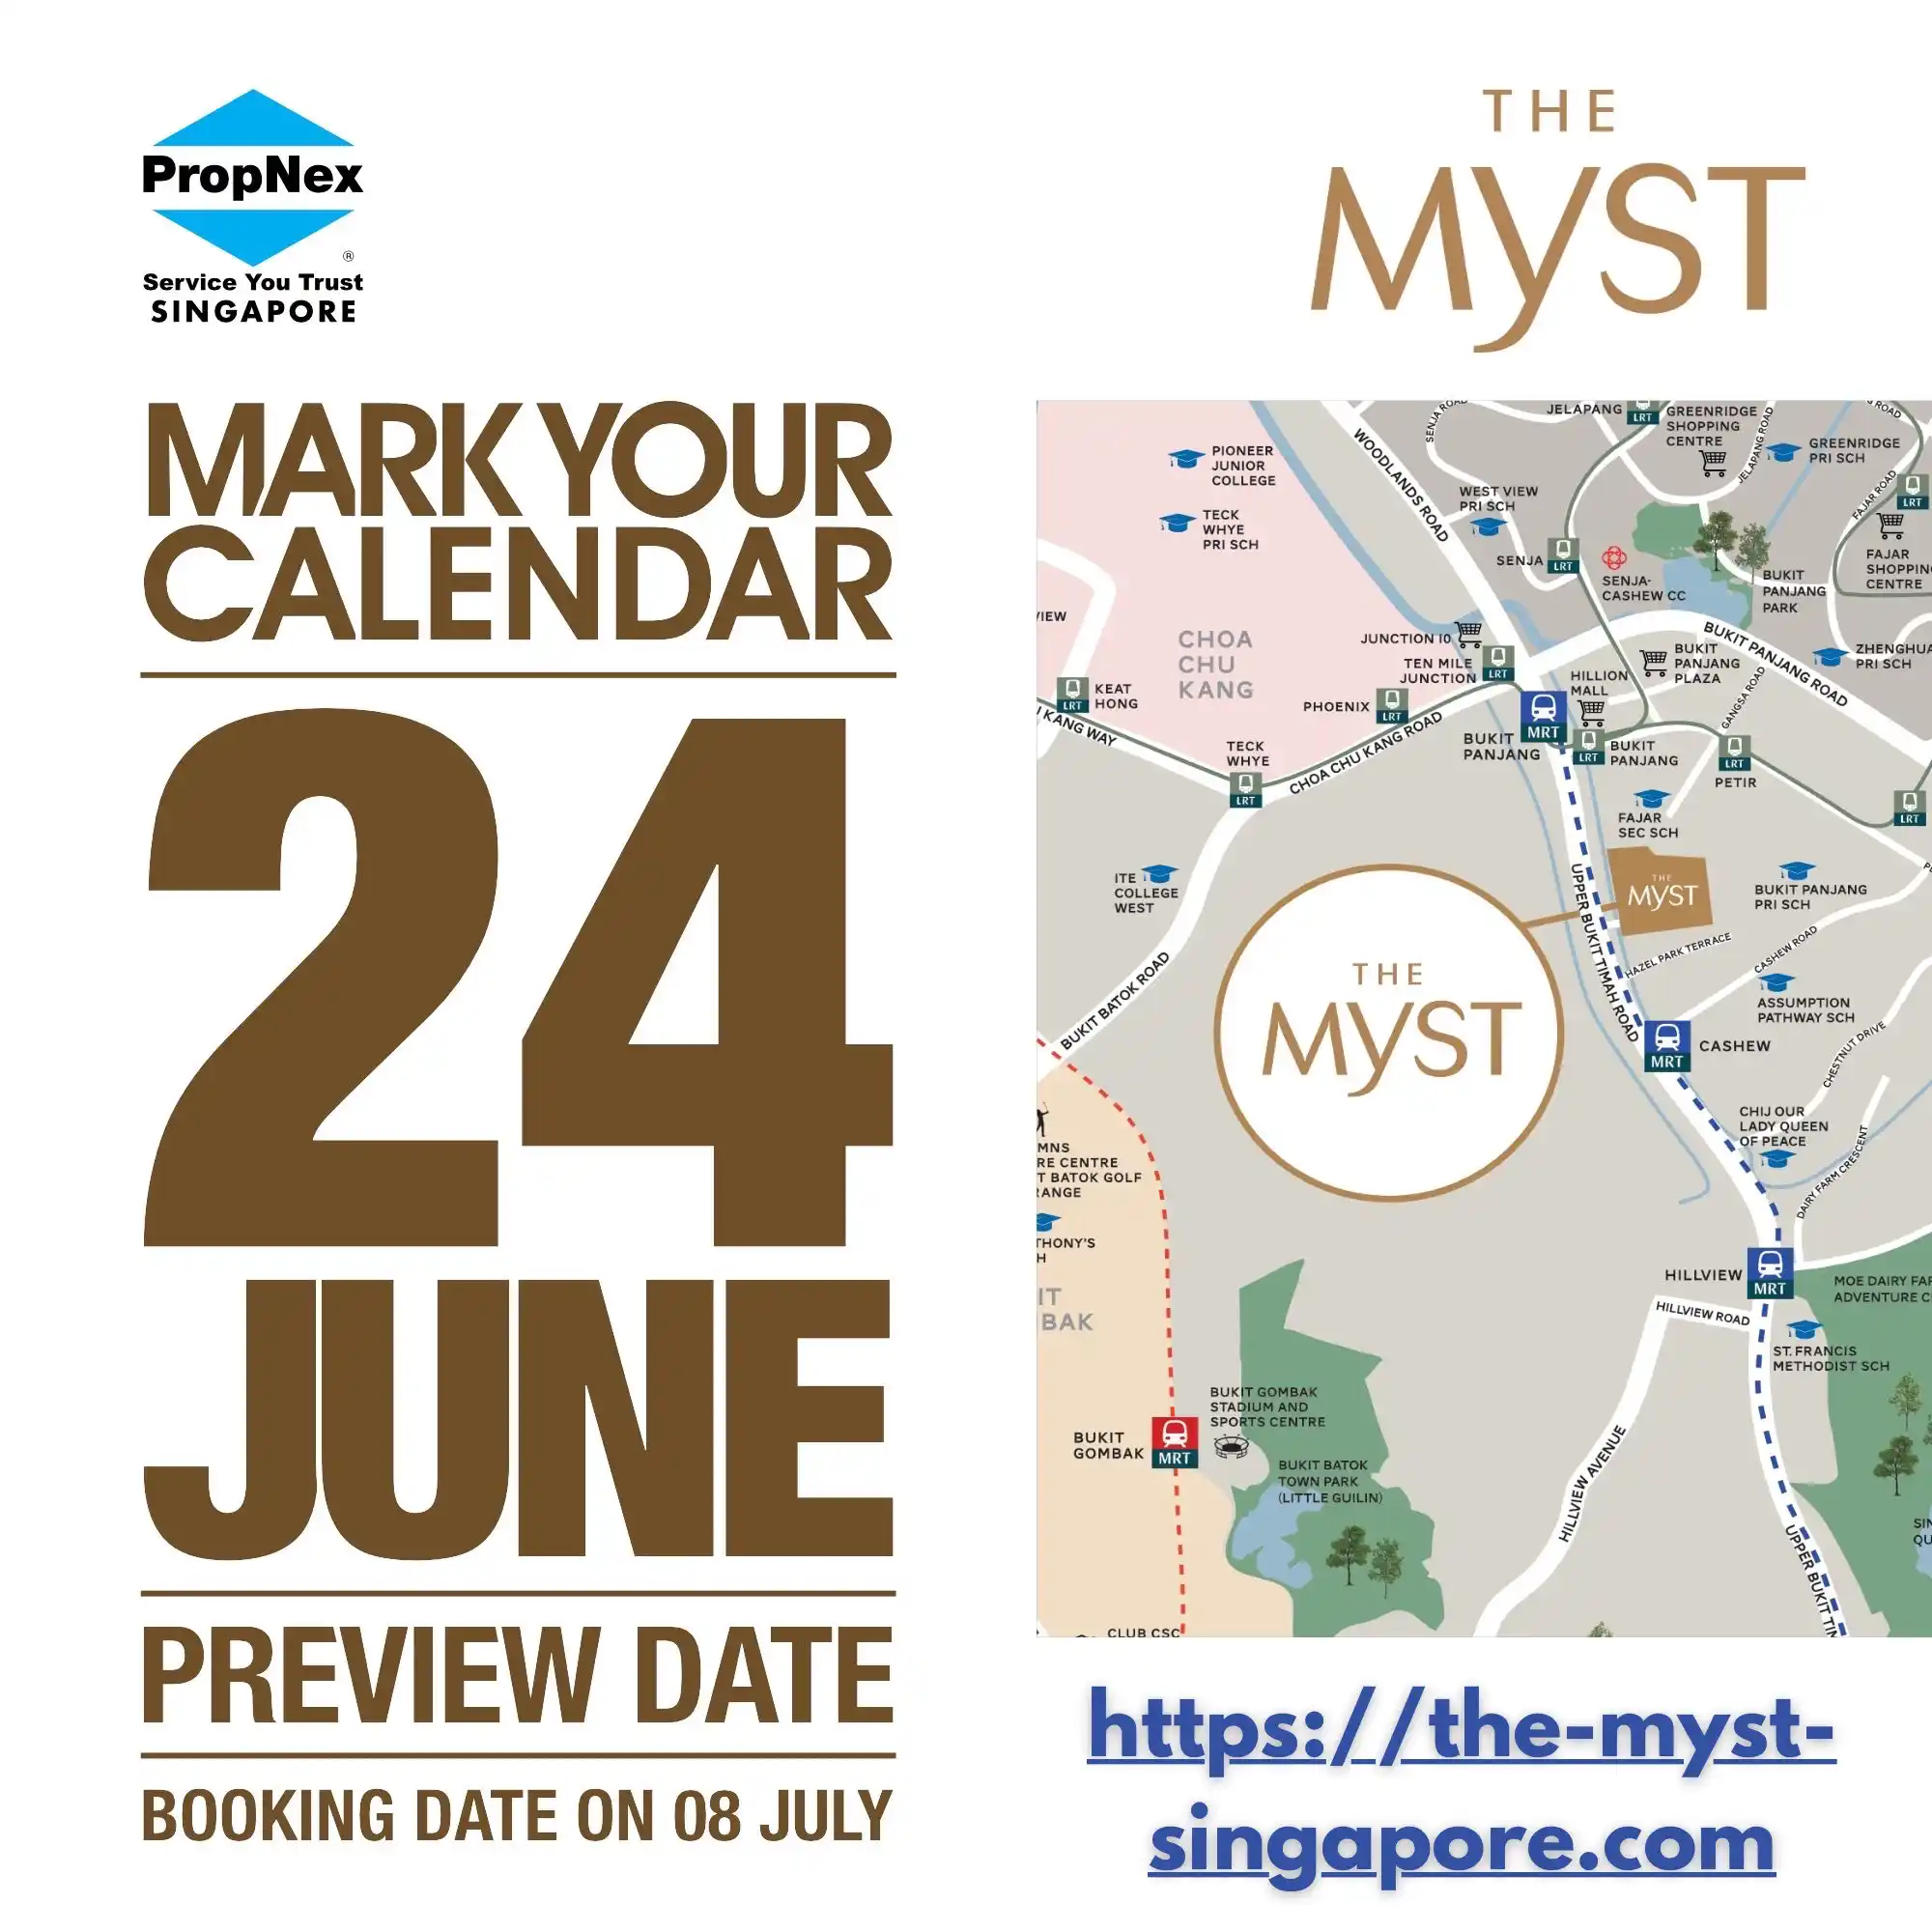 The Myst Preview Date and Booking Date